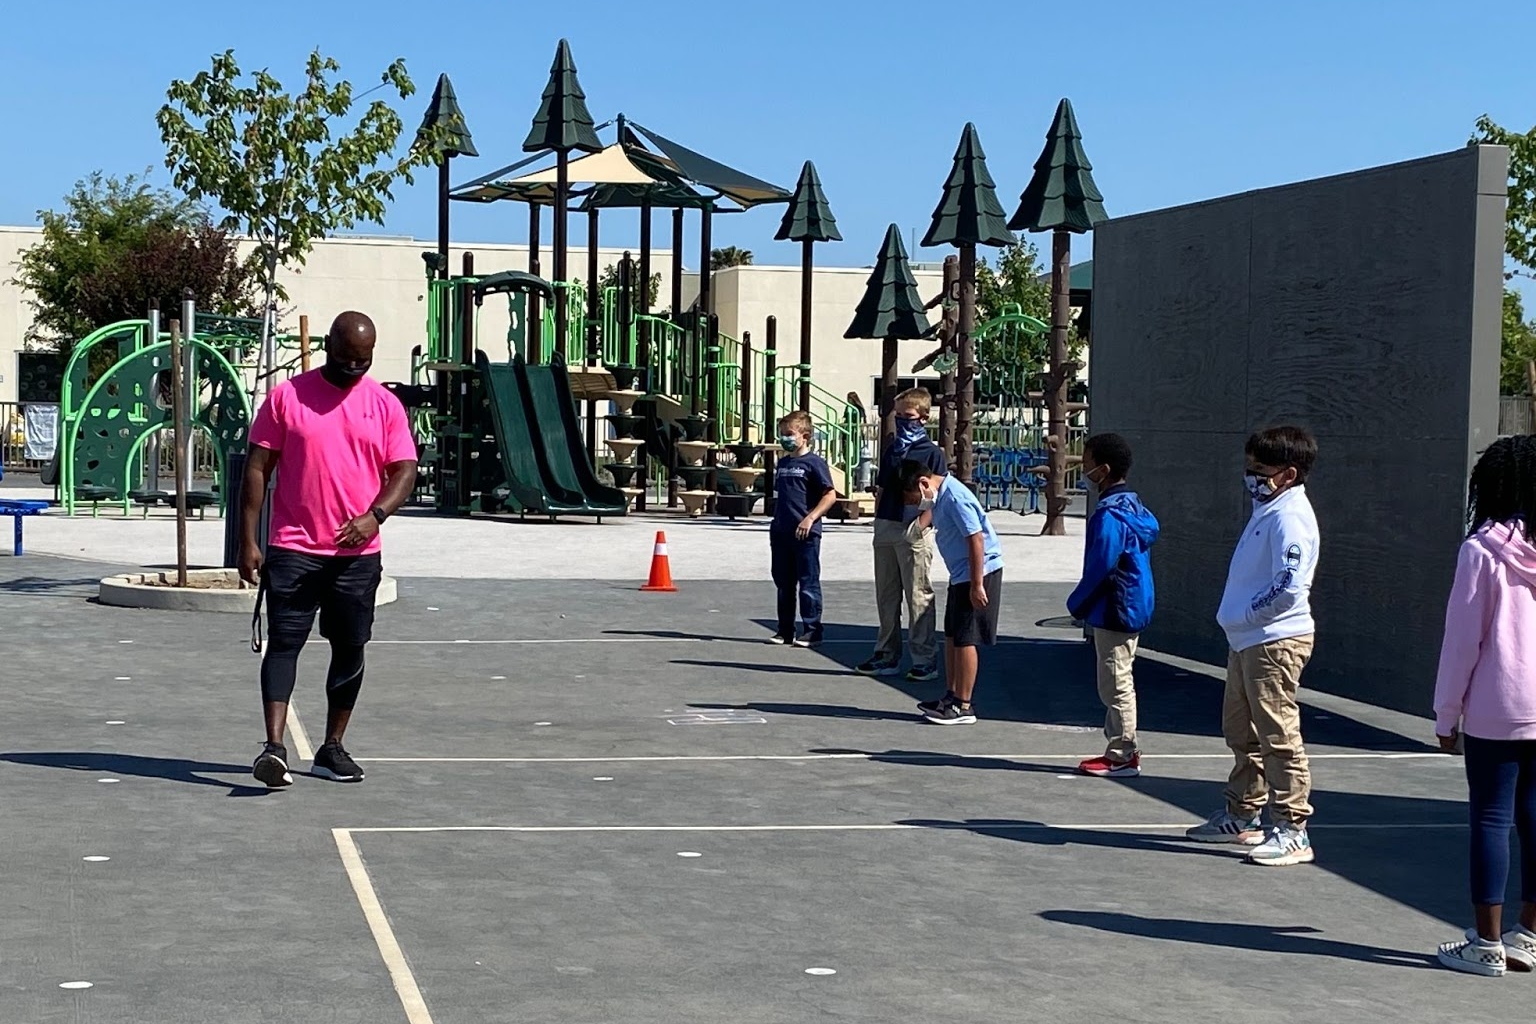 Our Explorer students safely enjoyed relay races on the blacktop during morning break this week. #WestlakeCharter